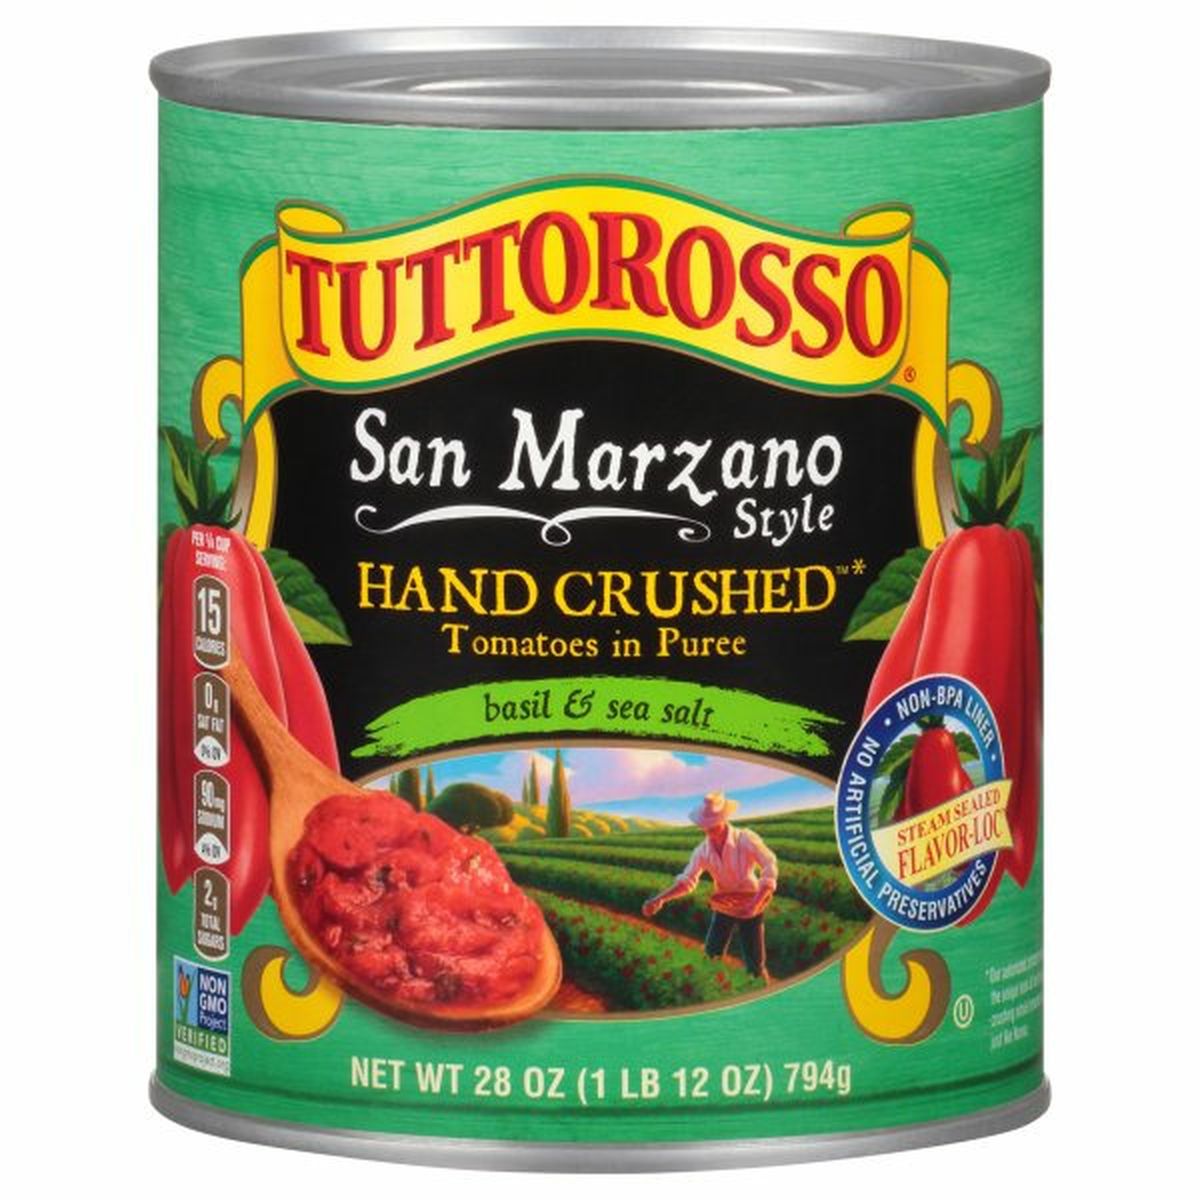 Calories in Tuttorosso Tomatoes Tomatoes in Puree,  Basil and Sea Salt, San Marzano Style